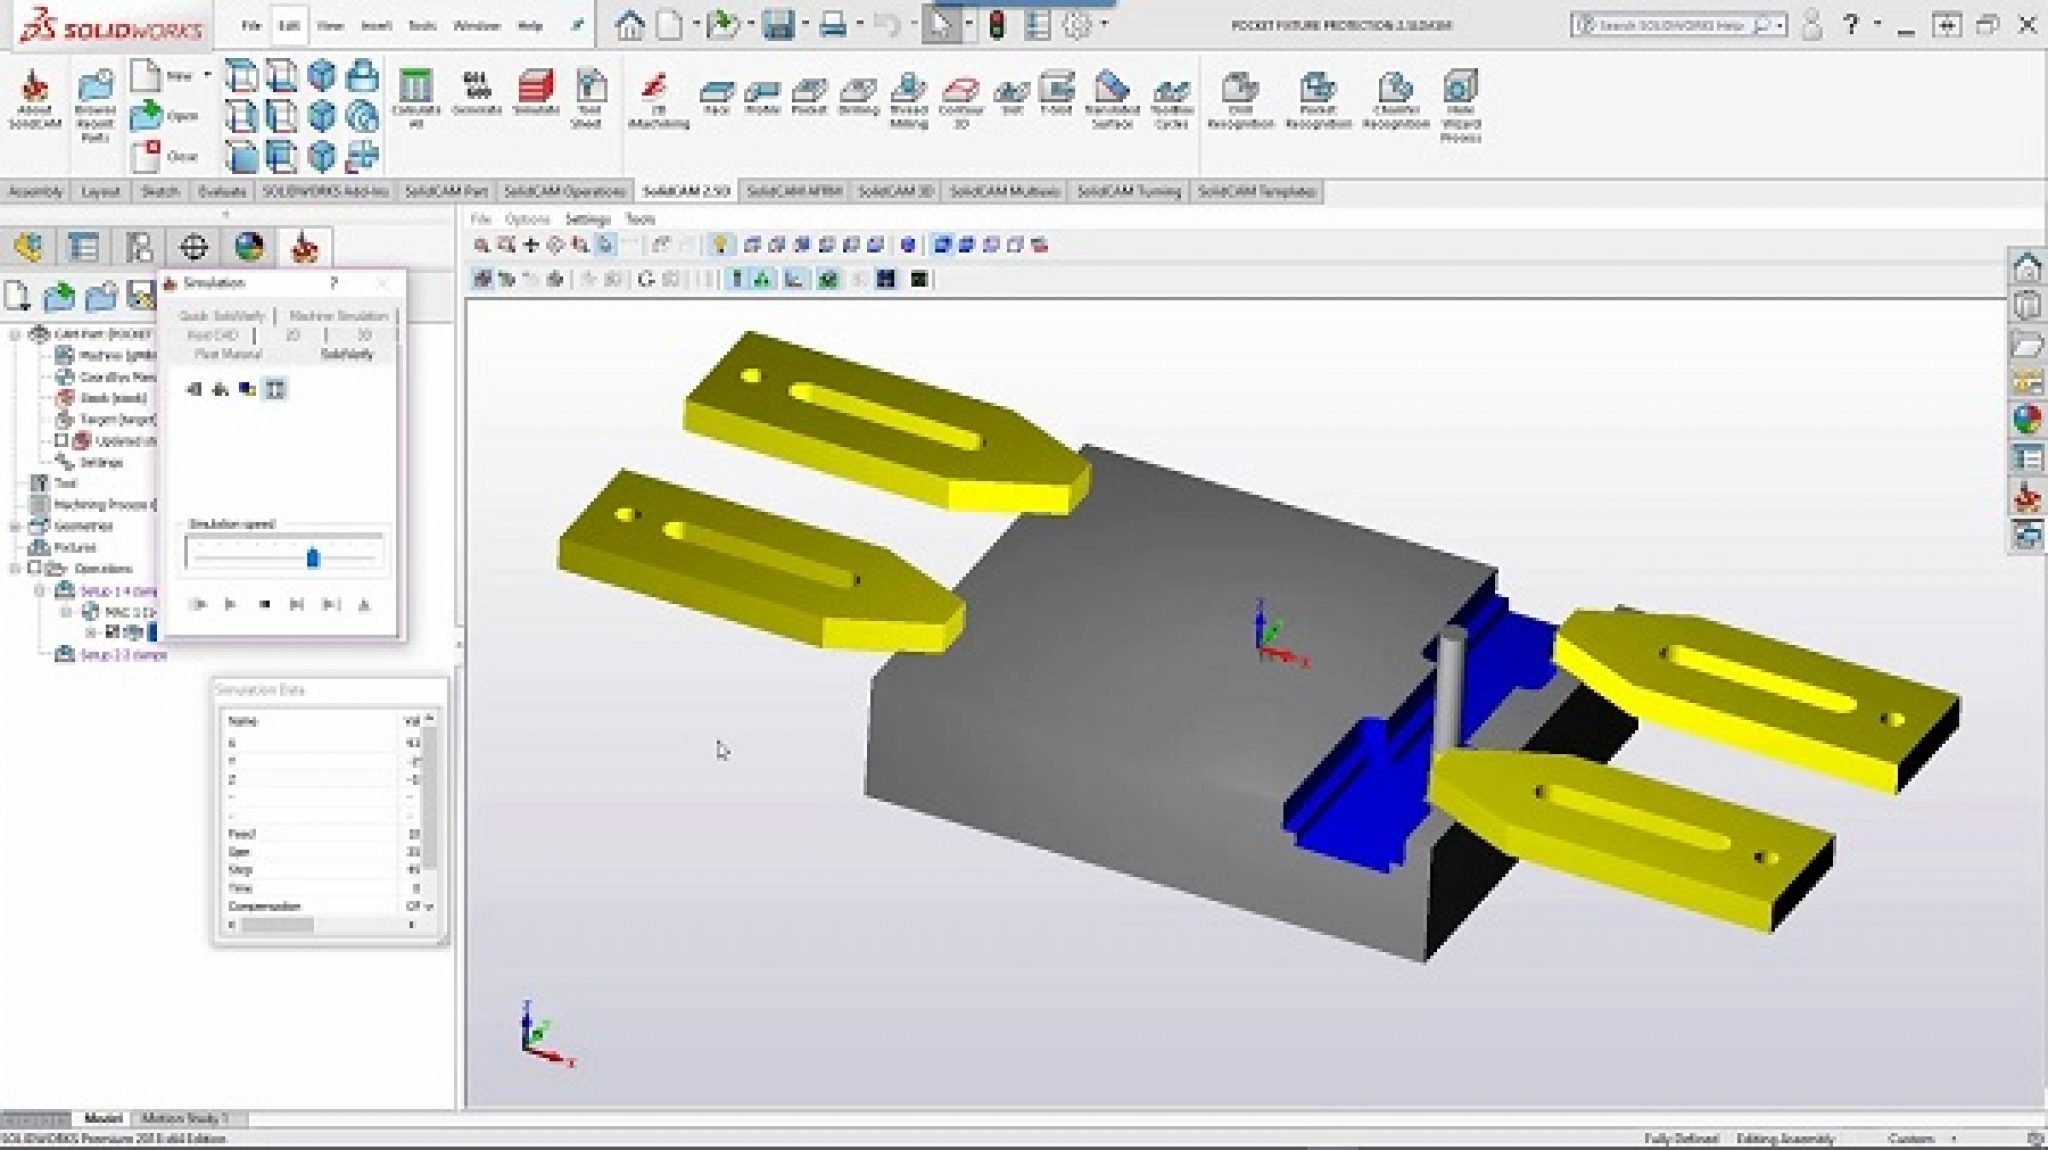 free downloads SolidCAM for SolidWorks 2023 SP1 HF1